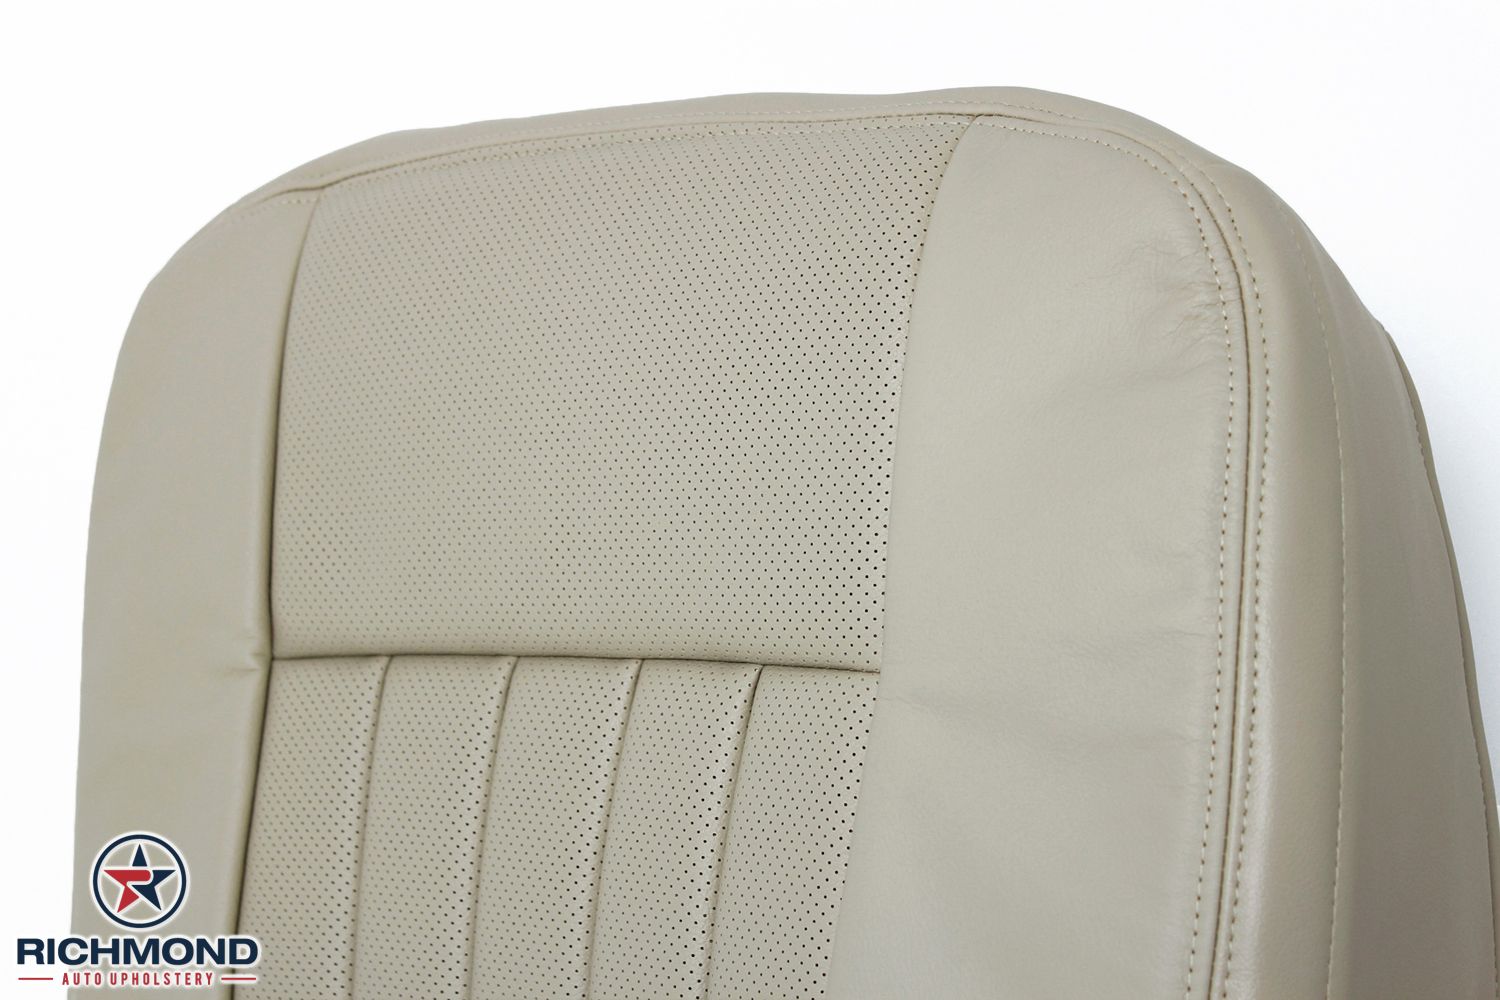  photo 2003-2004-Lincoln-Navigator-Driver-
Side-Bottom-Replacement-Leather-Seat-Cover-KA-3L7Z7862901BBA-6_zpsxuaovrlg.jpg